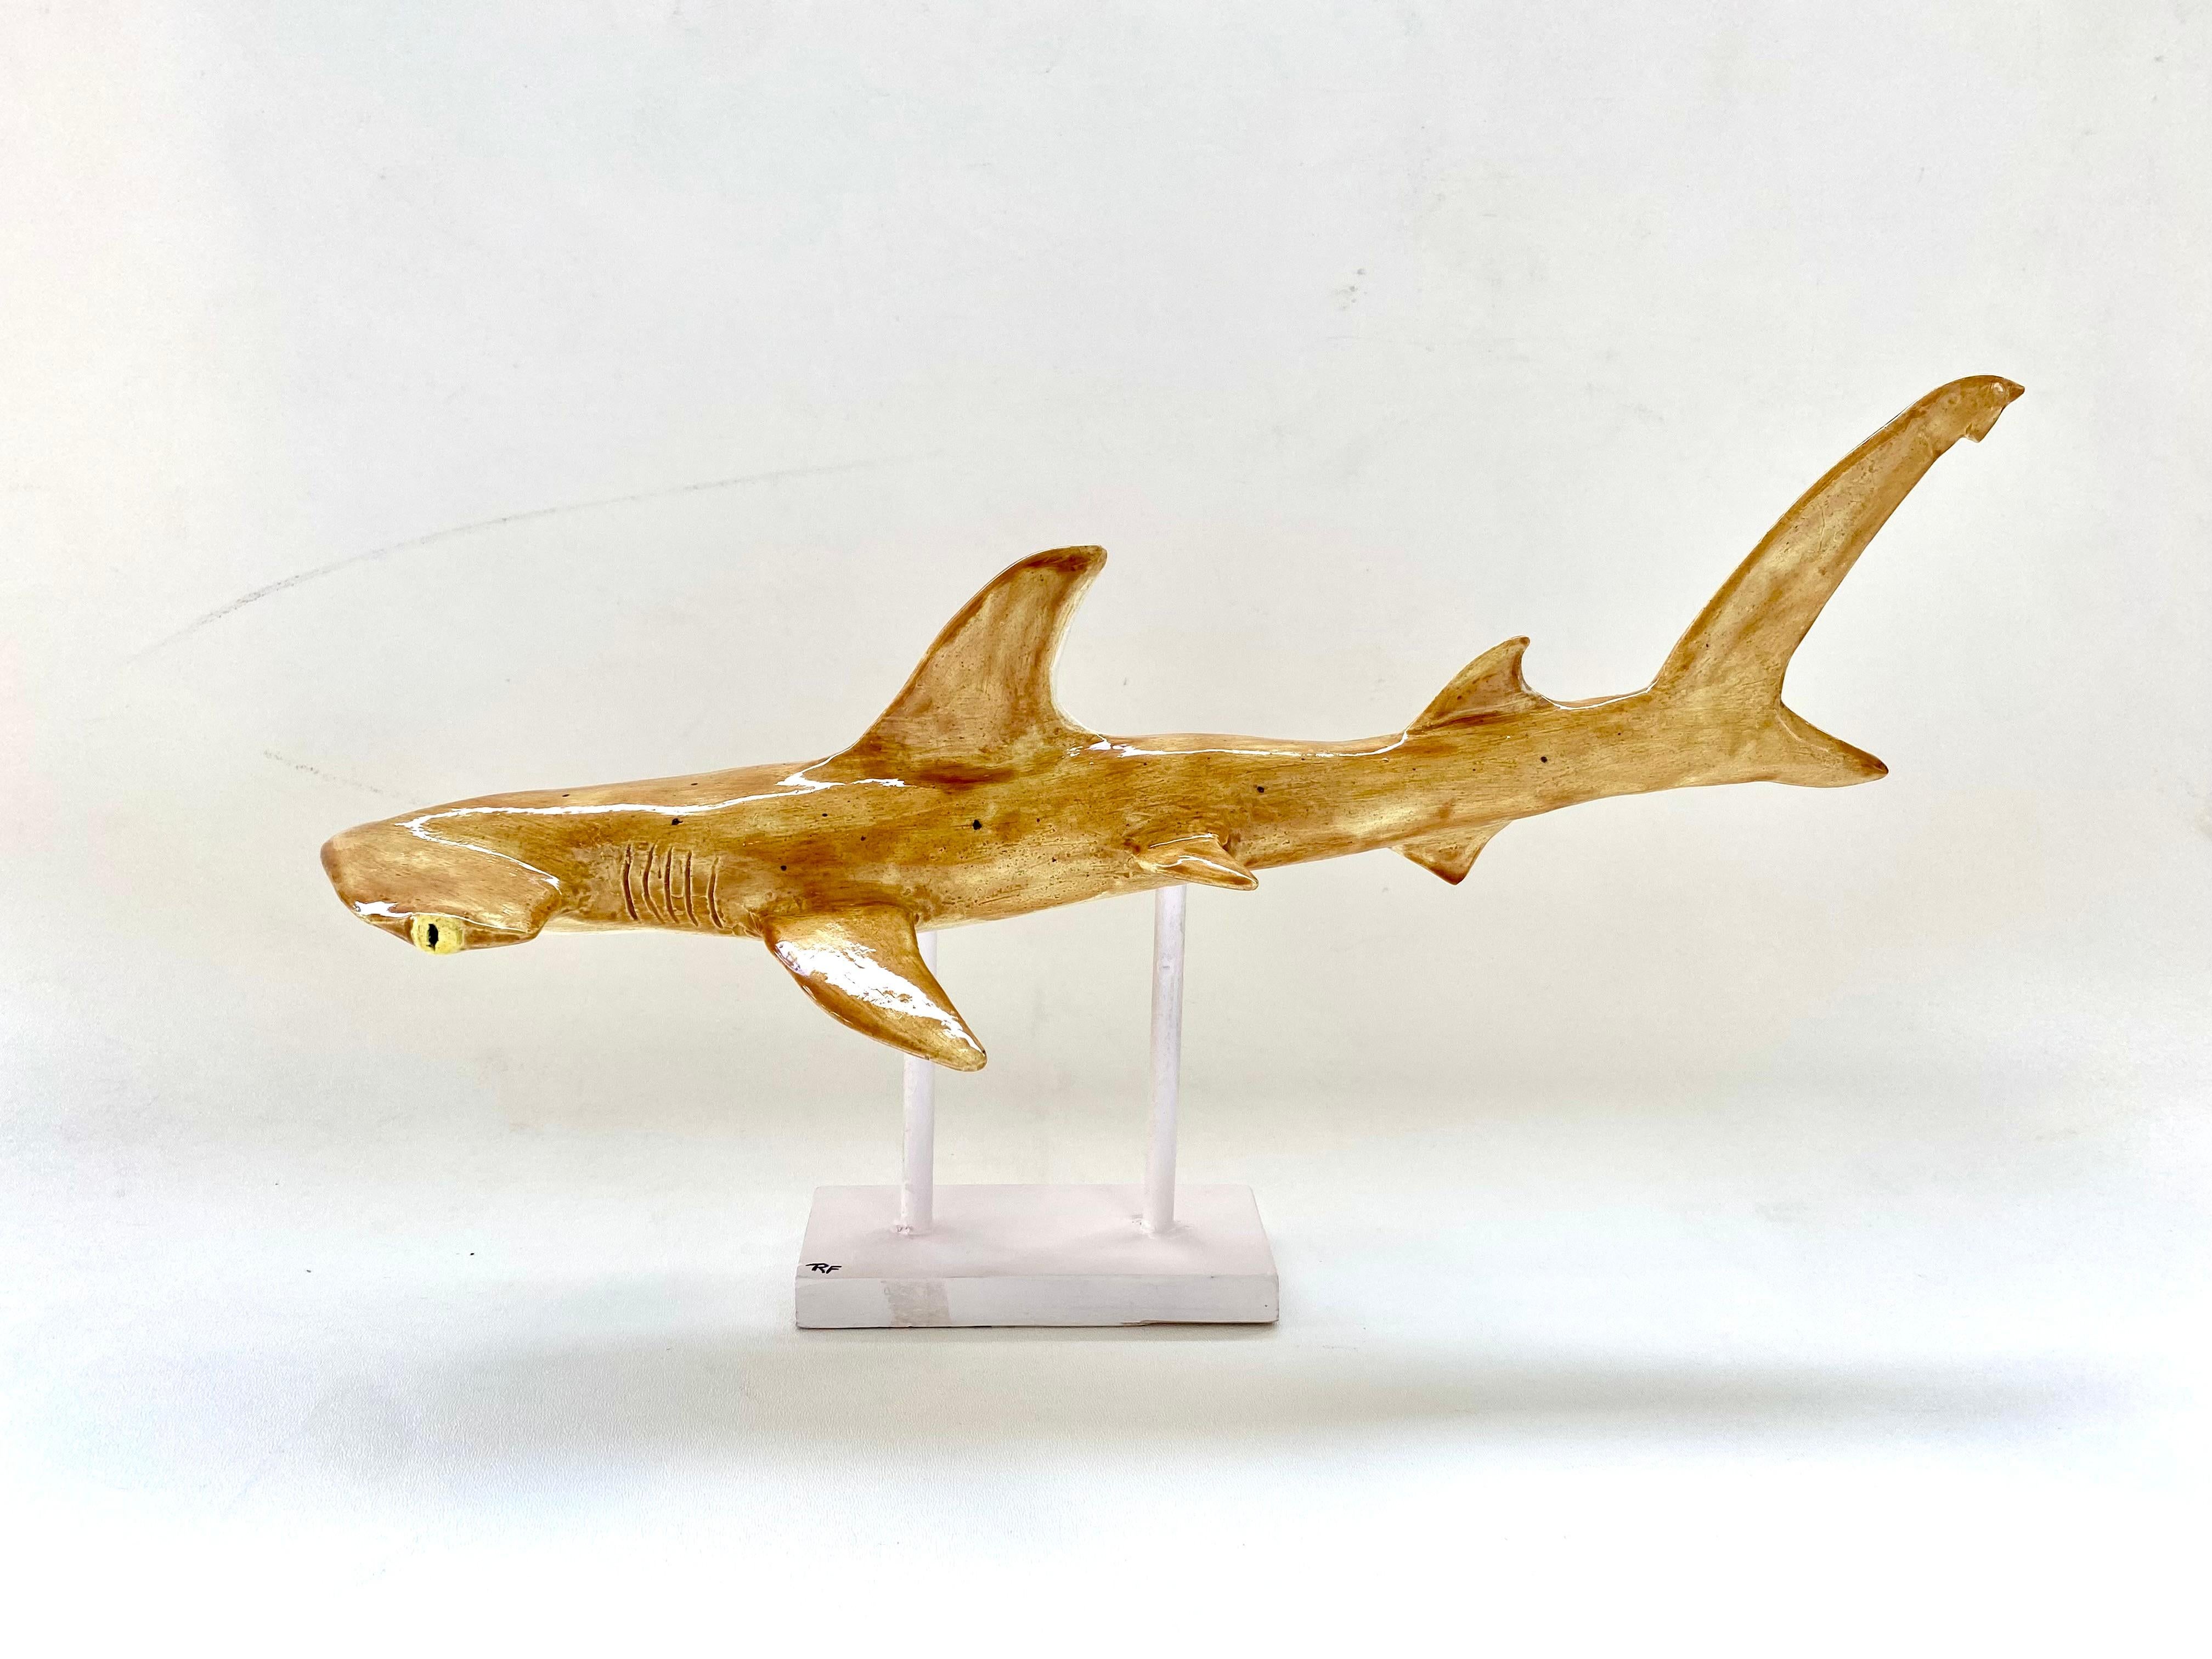 Hand-Made Sculptural Glazed Ceramic Hammerhead Shark on Stand by Rexx Fischer 

Offered for sale is a hand-made sculptural glazed ceramic Hammerhead shark on stand by Rexx Fischer . This piece was inspired by the Florida Keys and the artist's